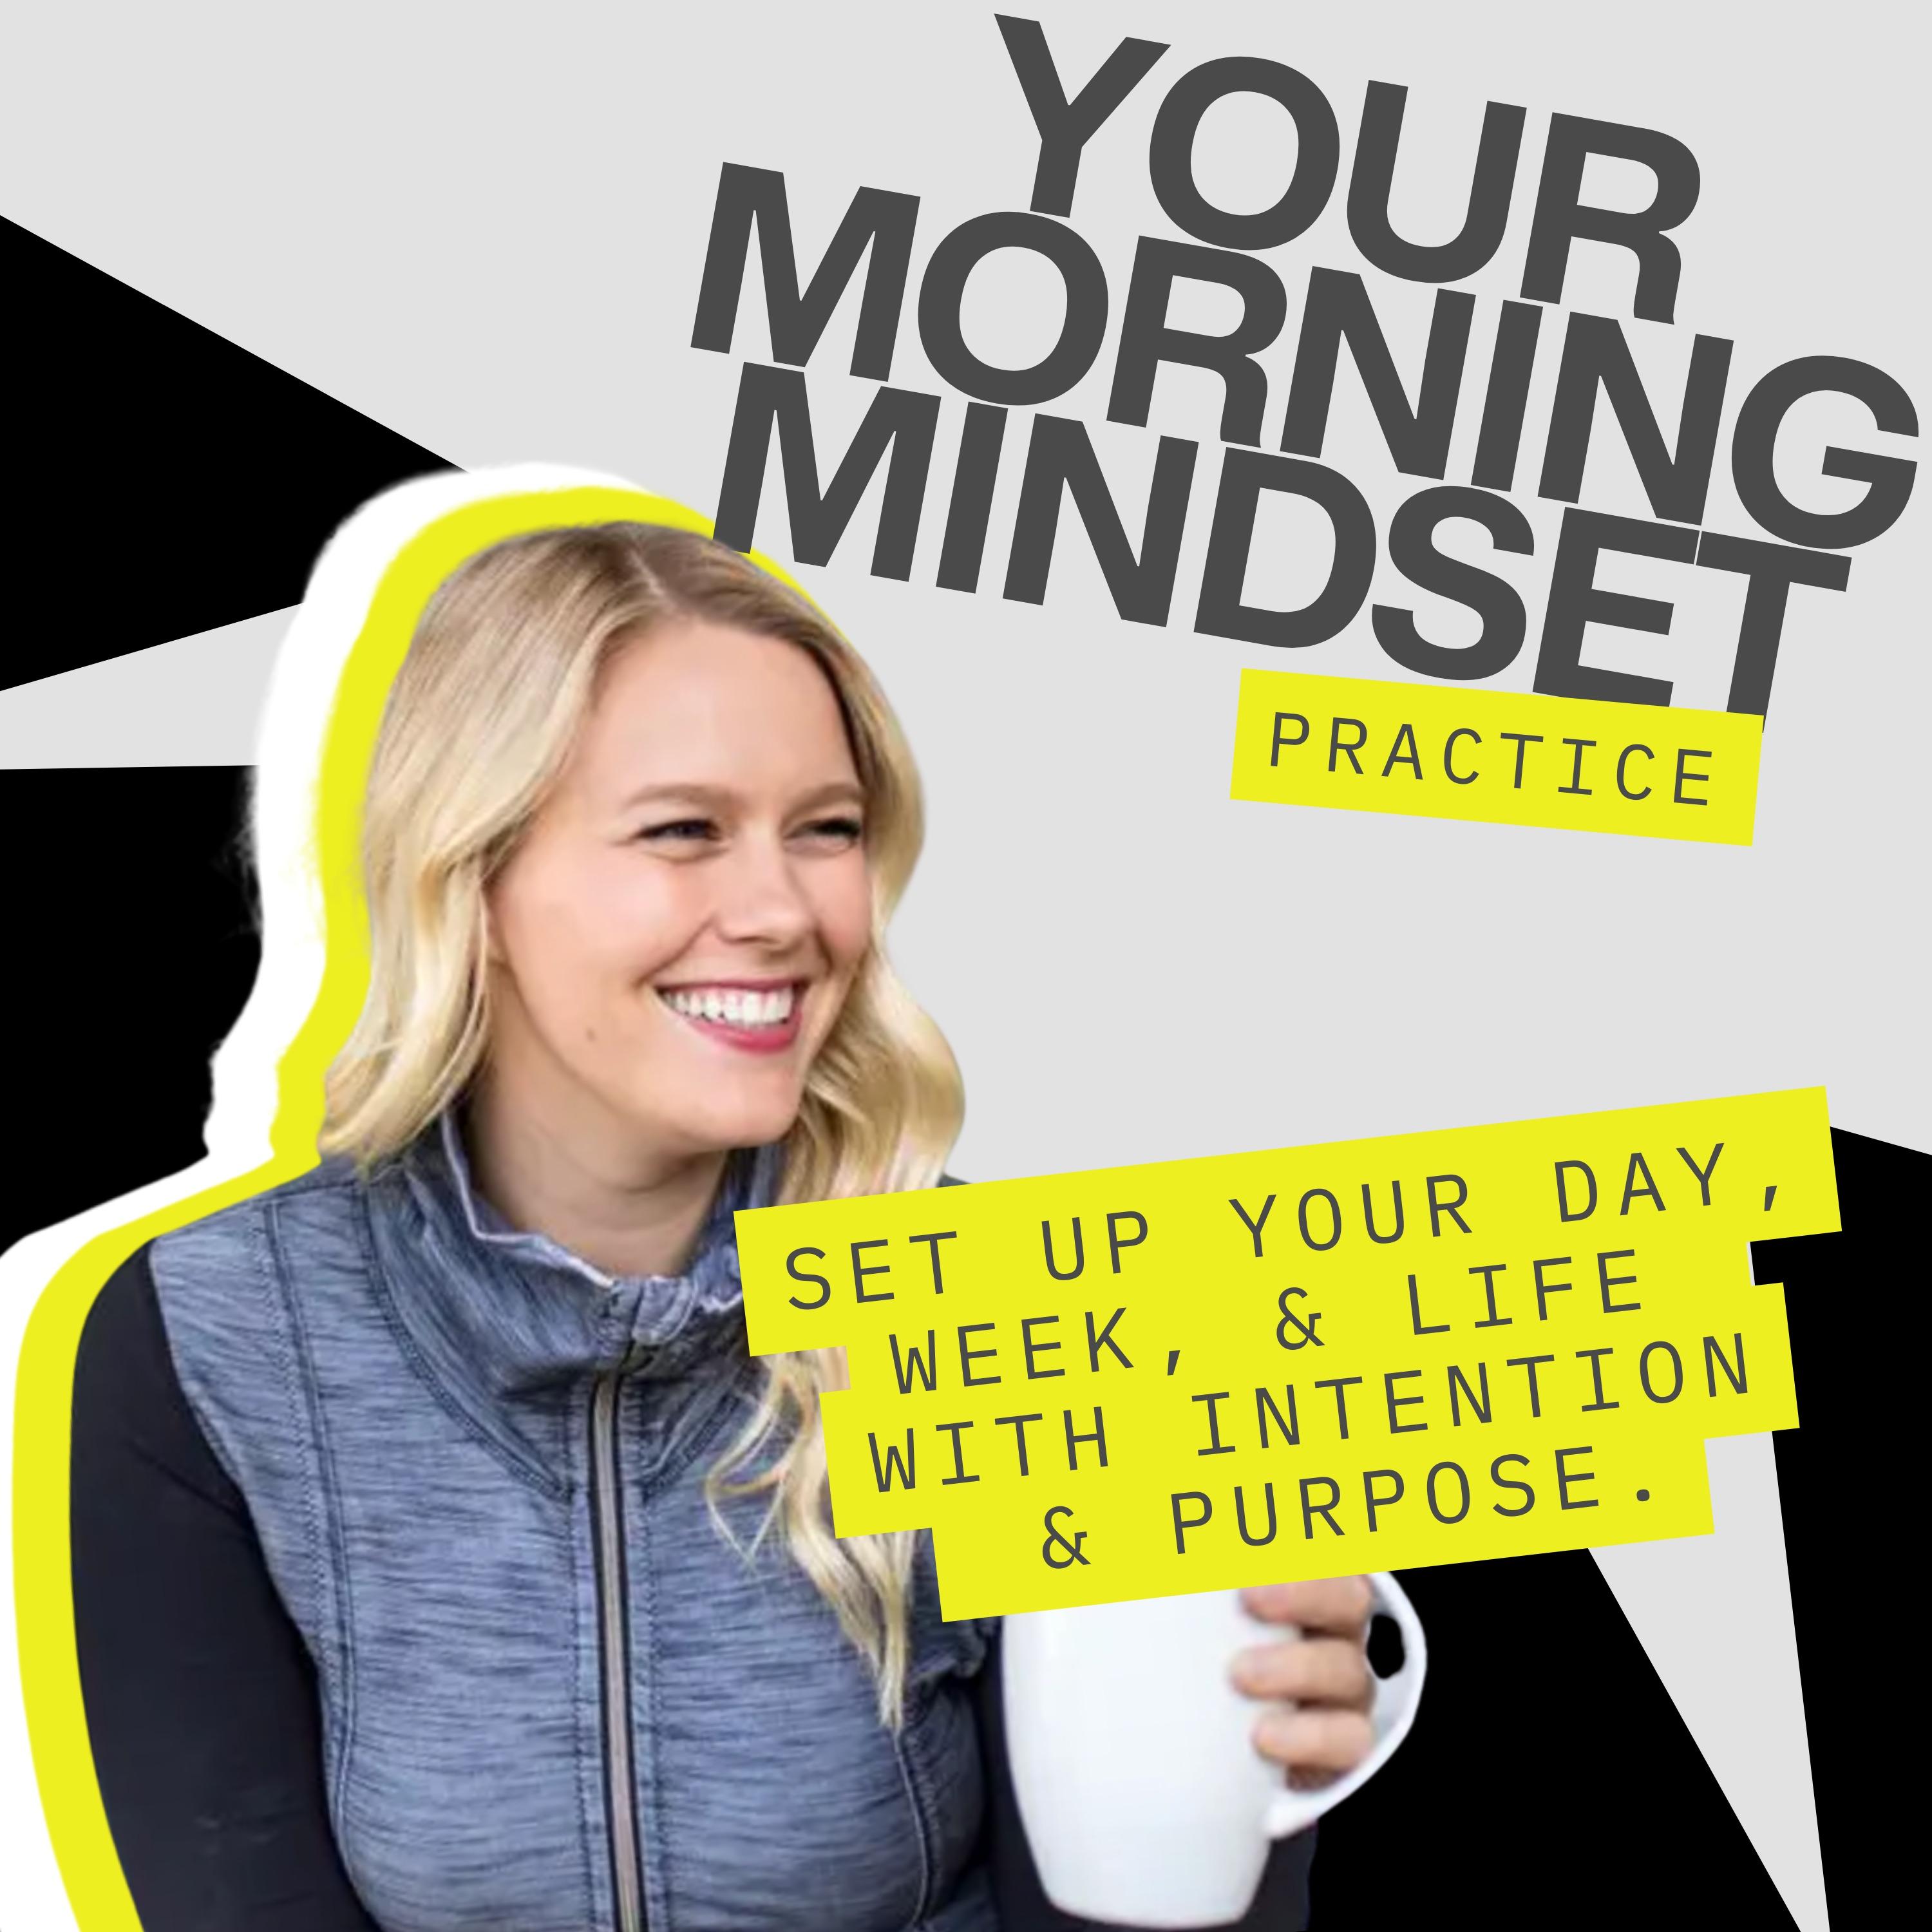 Your Morning Mindset Practice